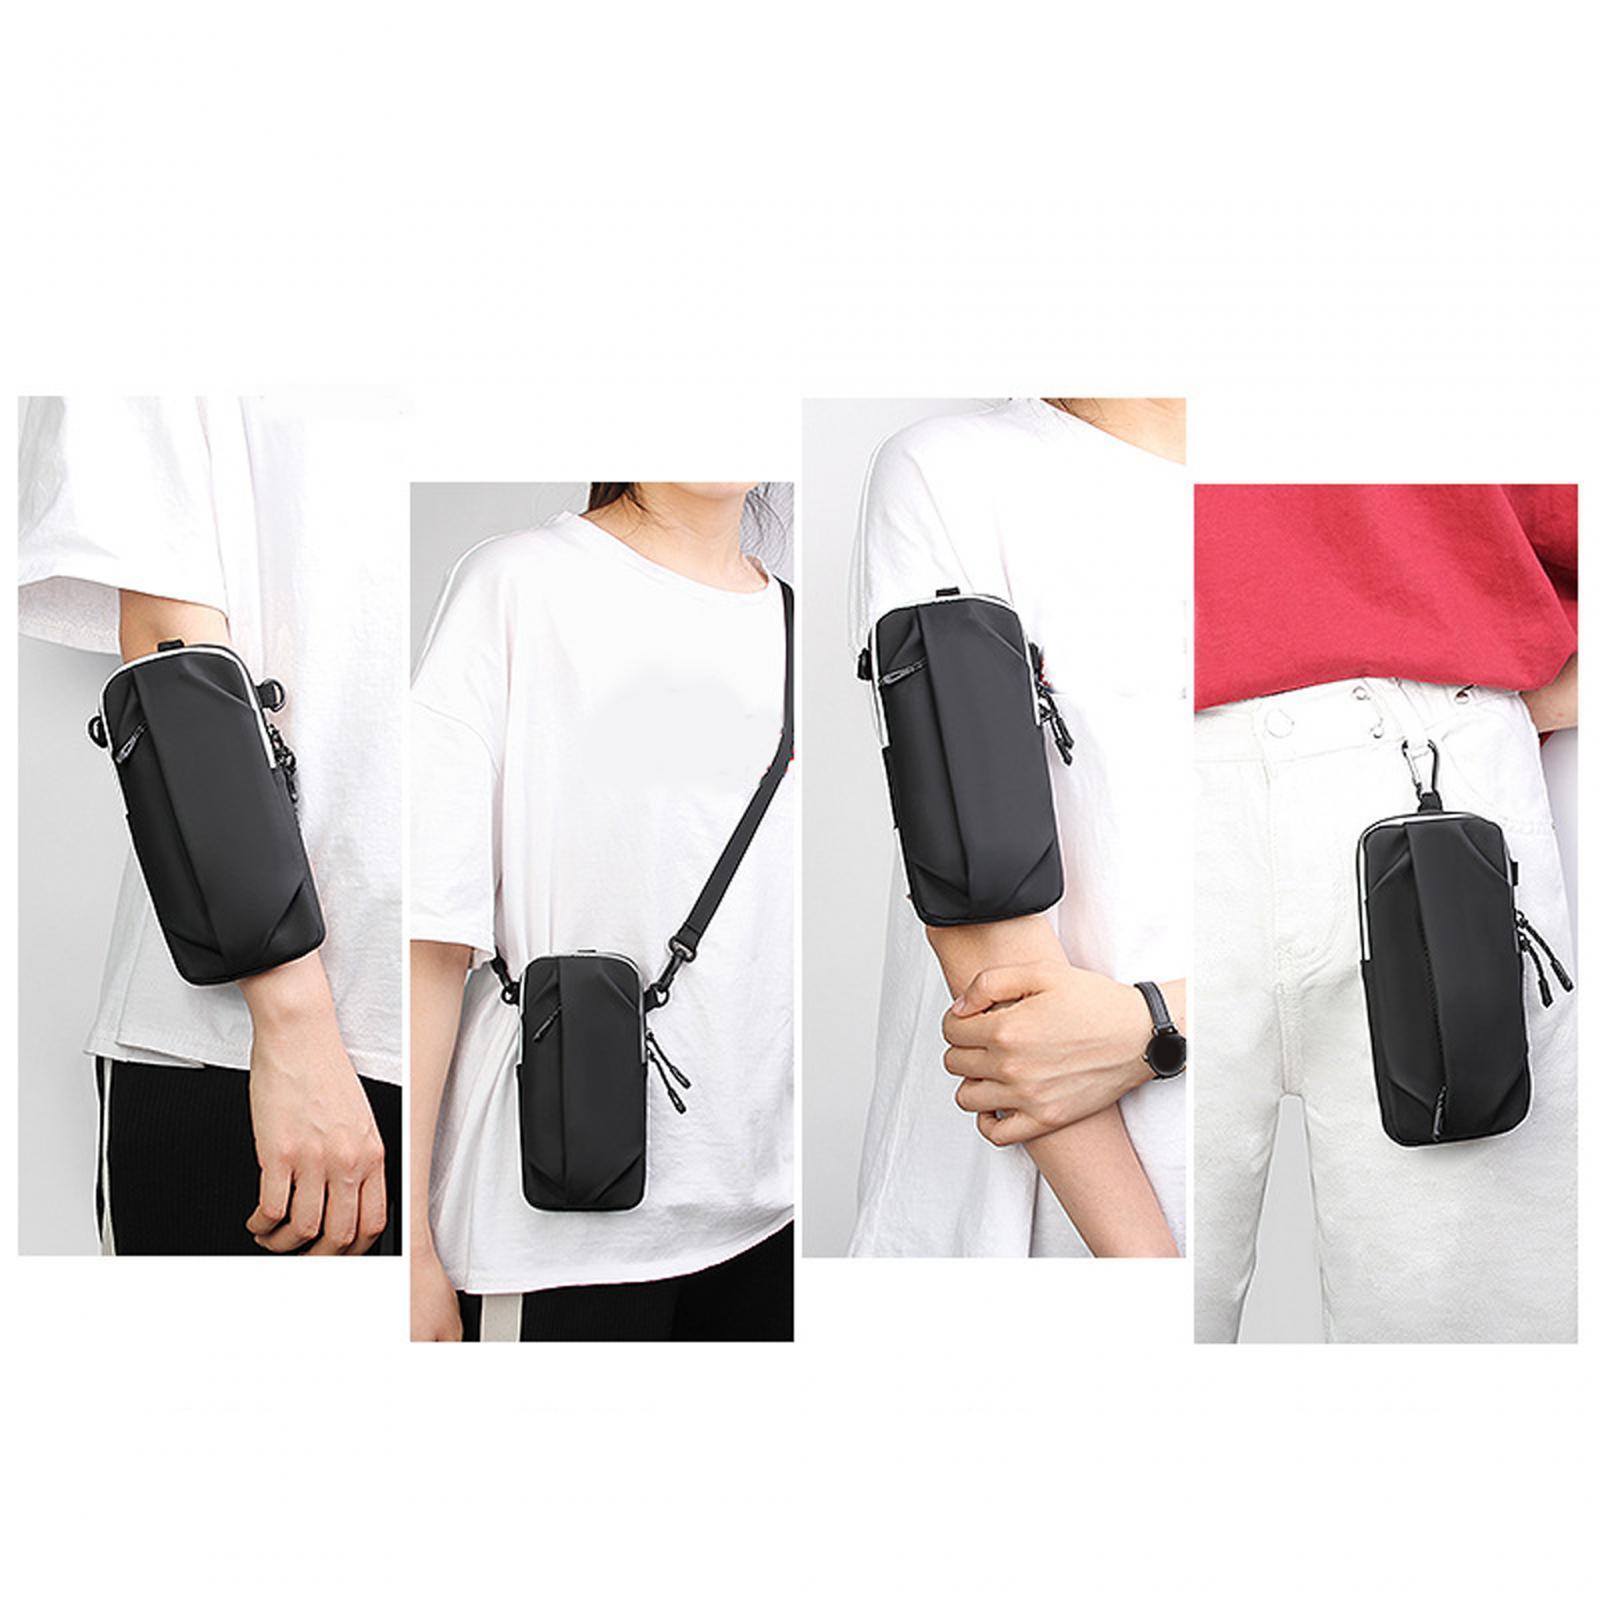 Phone Armband Bag Gym Armbands Bag Phone Holder Pouch Case PU Leather Sports Arm Bag Wrist Pouch for Workout Jogging Exercise